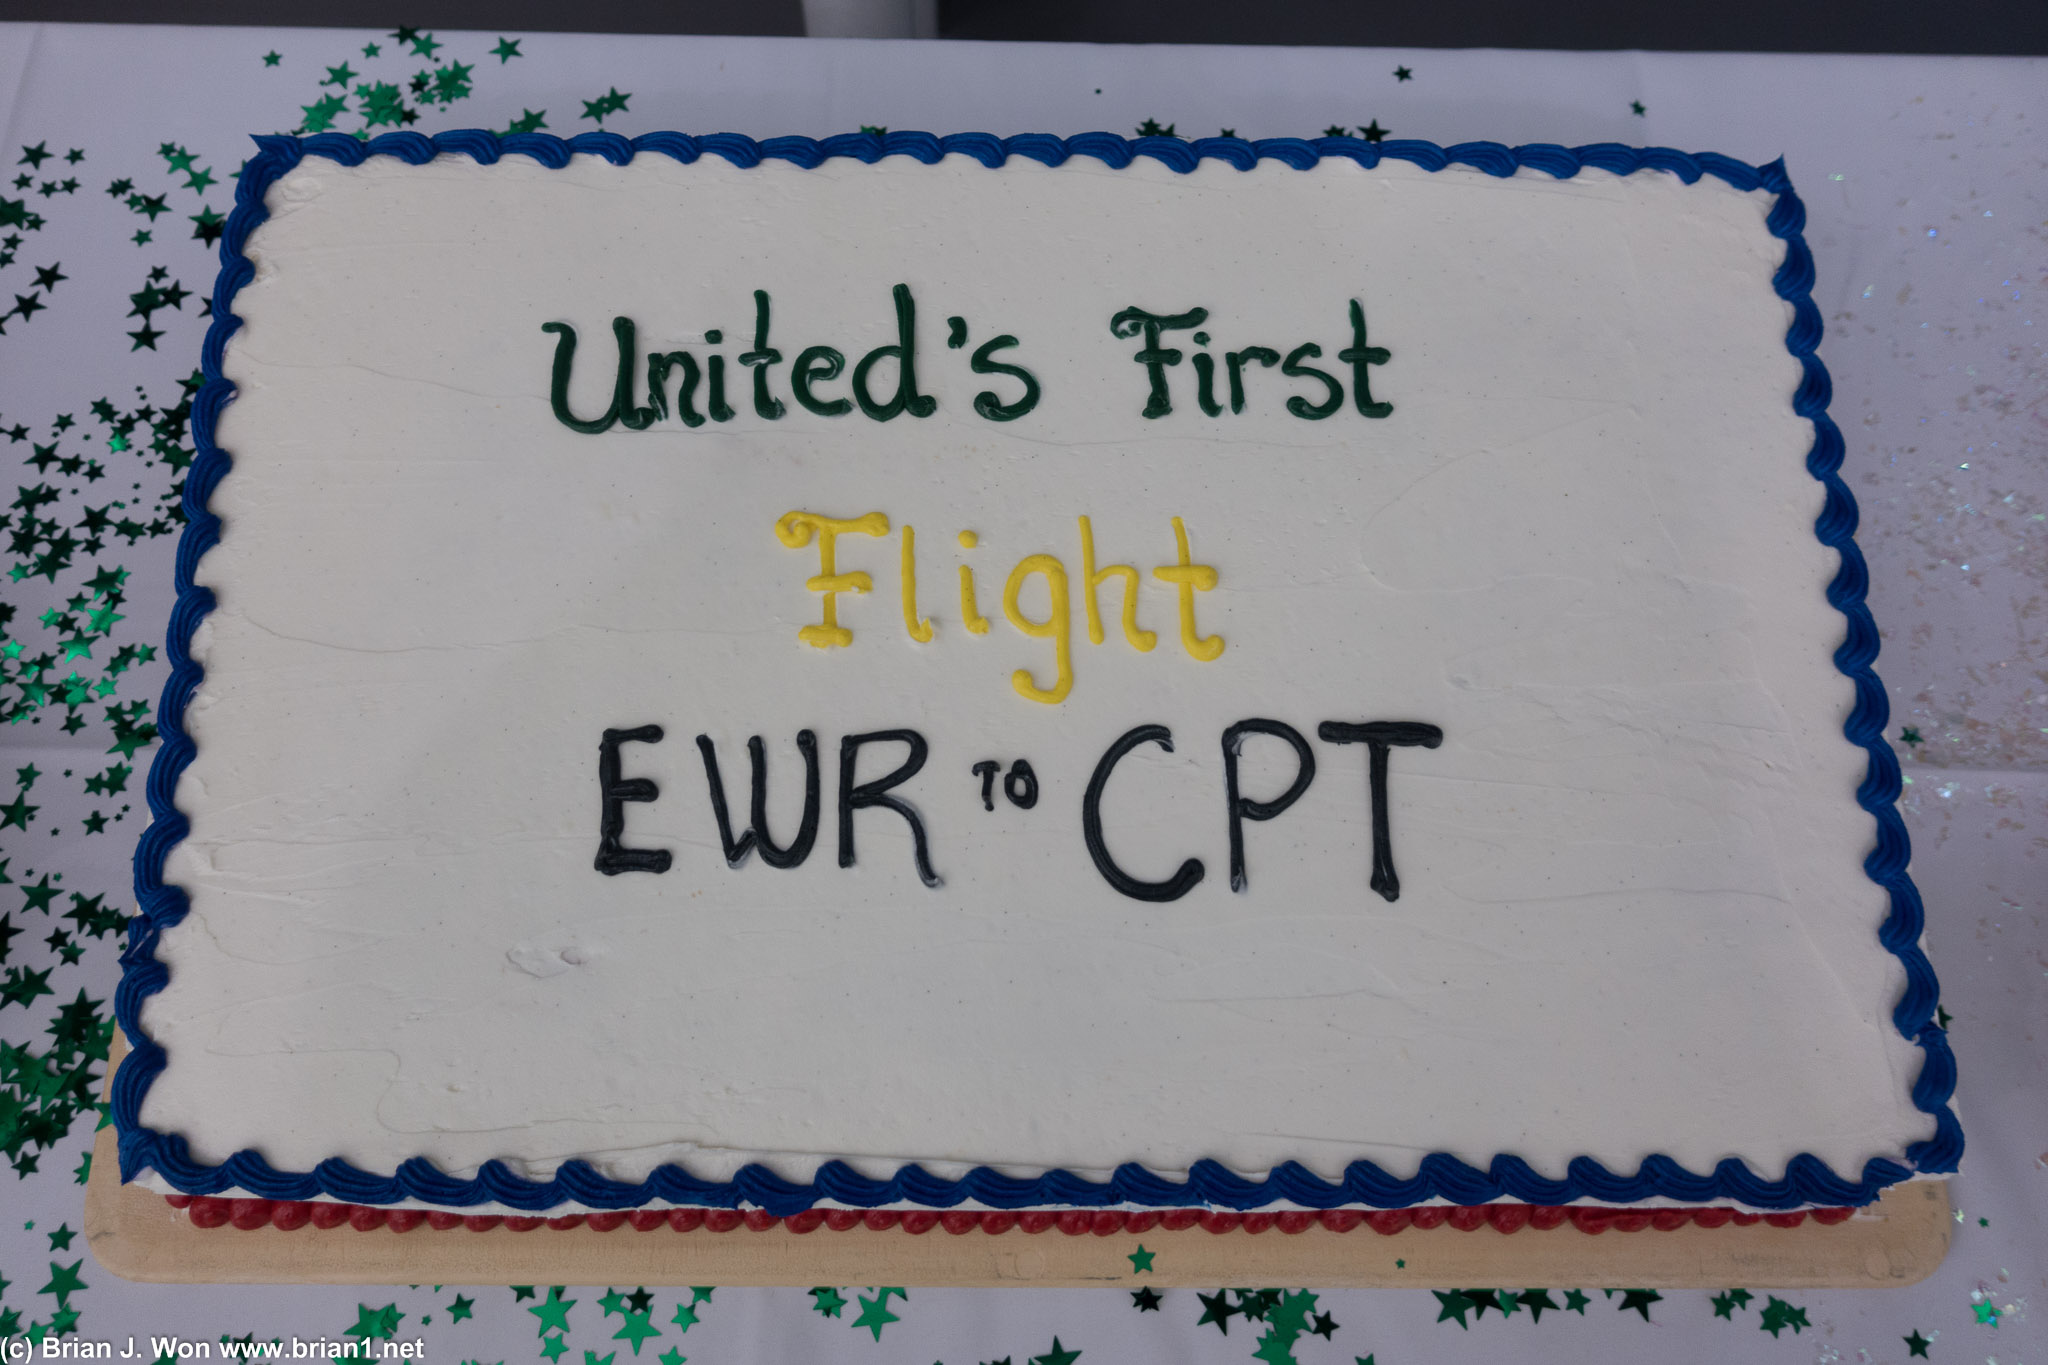 You'd think United would have done a less plain cake for such a big occasion.